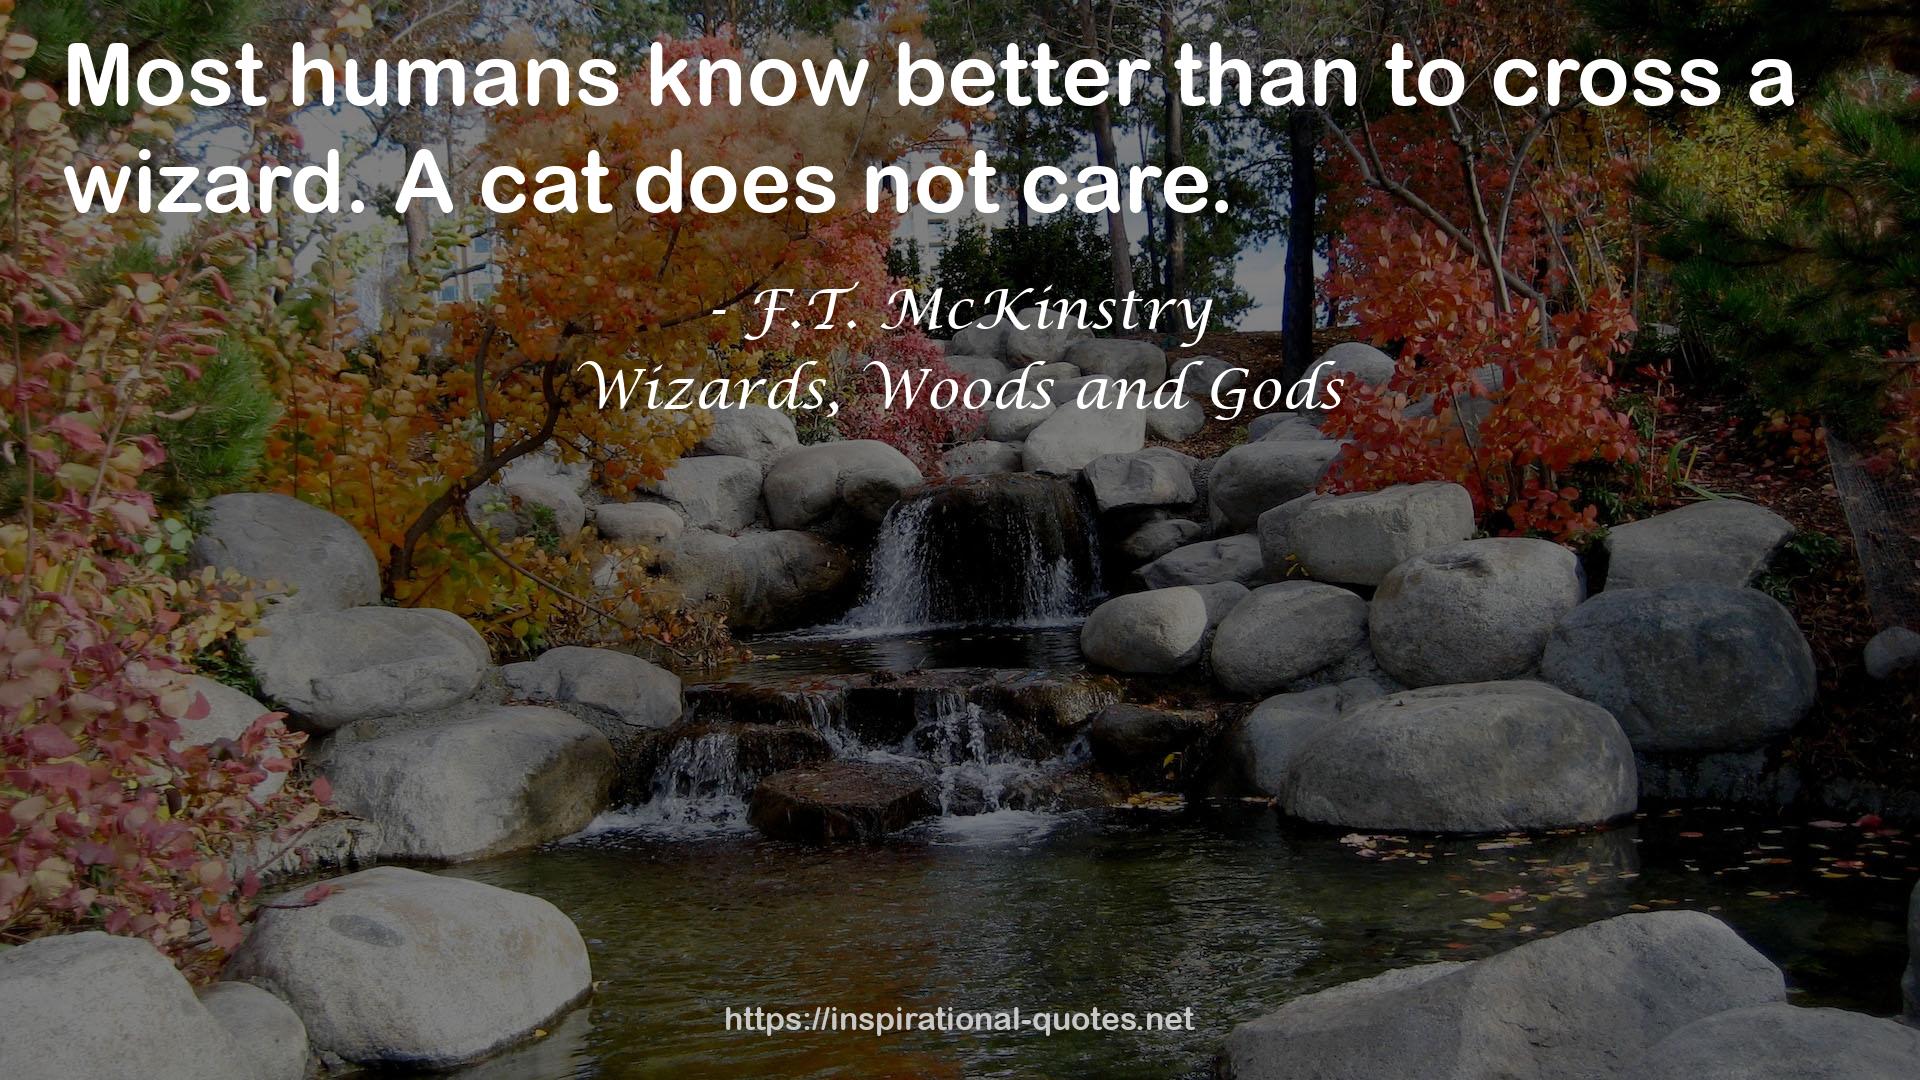 Wizards, Woods and Gods QUOTES